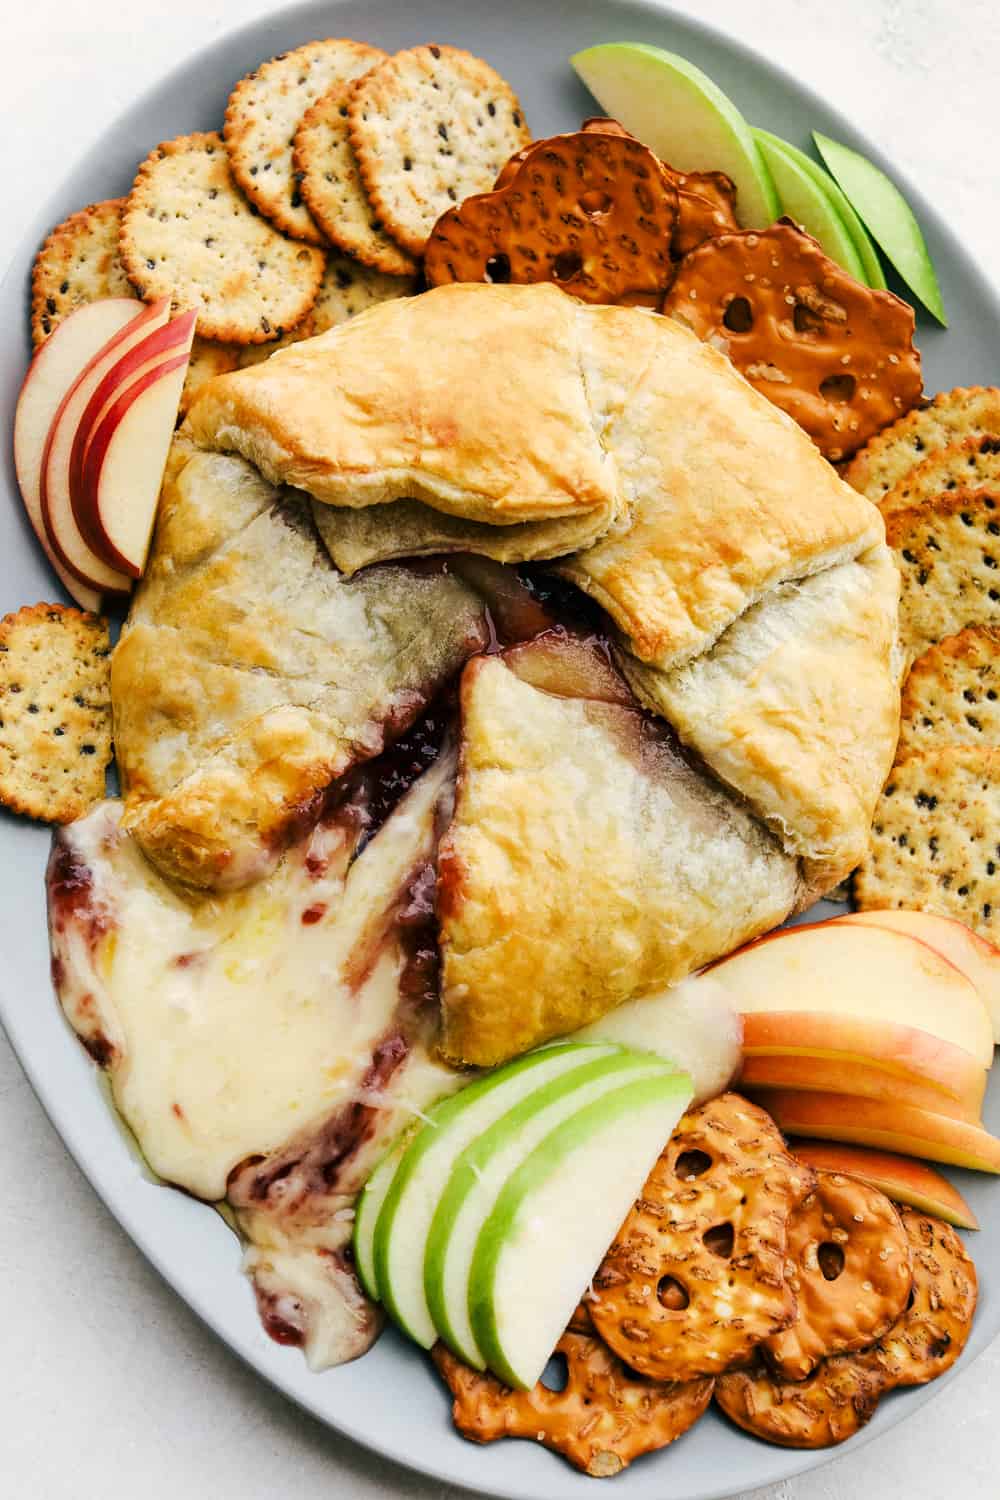 Baked Brie with Raspberries on a plant with crackers, and sliced apples.